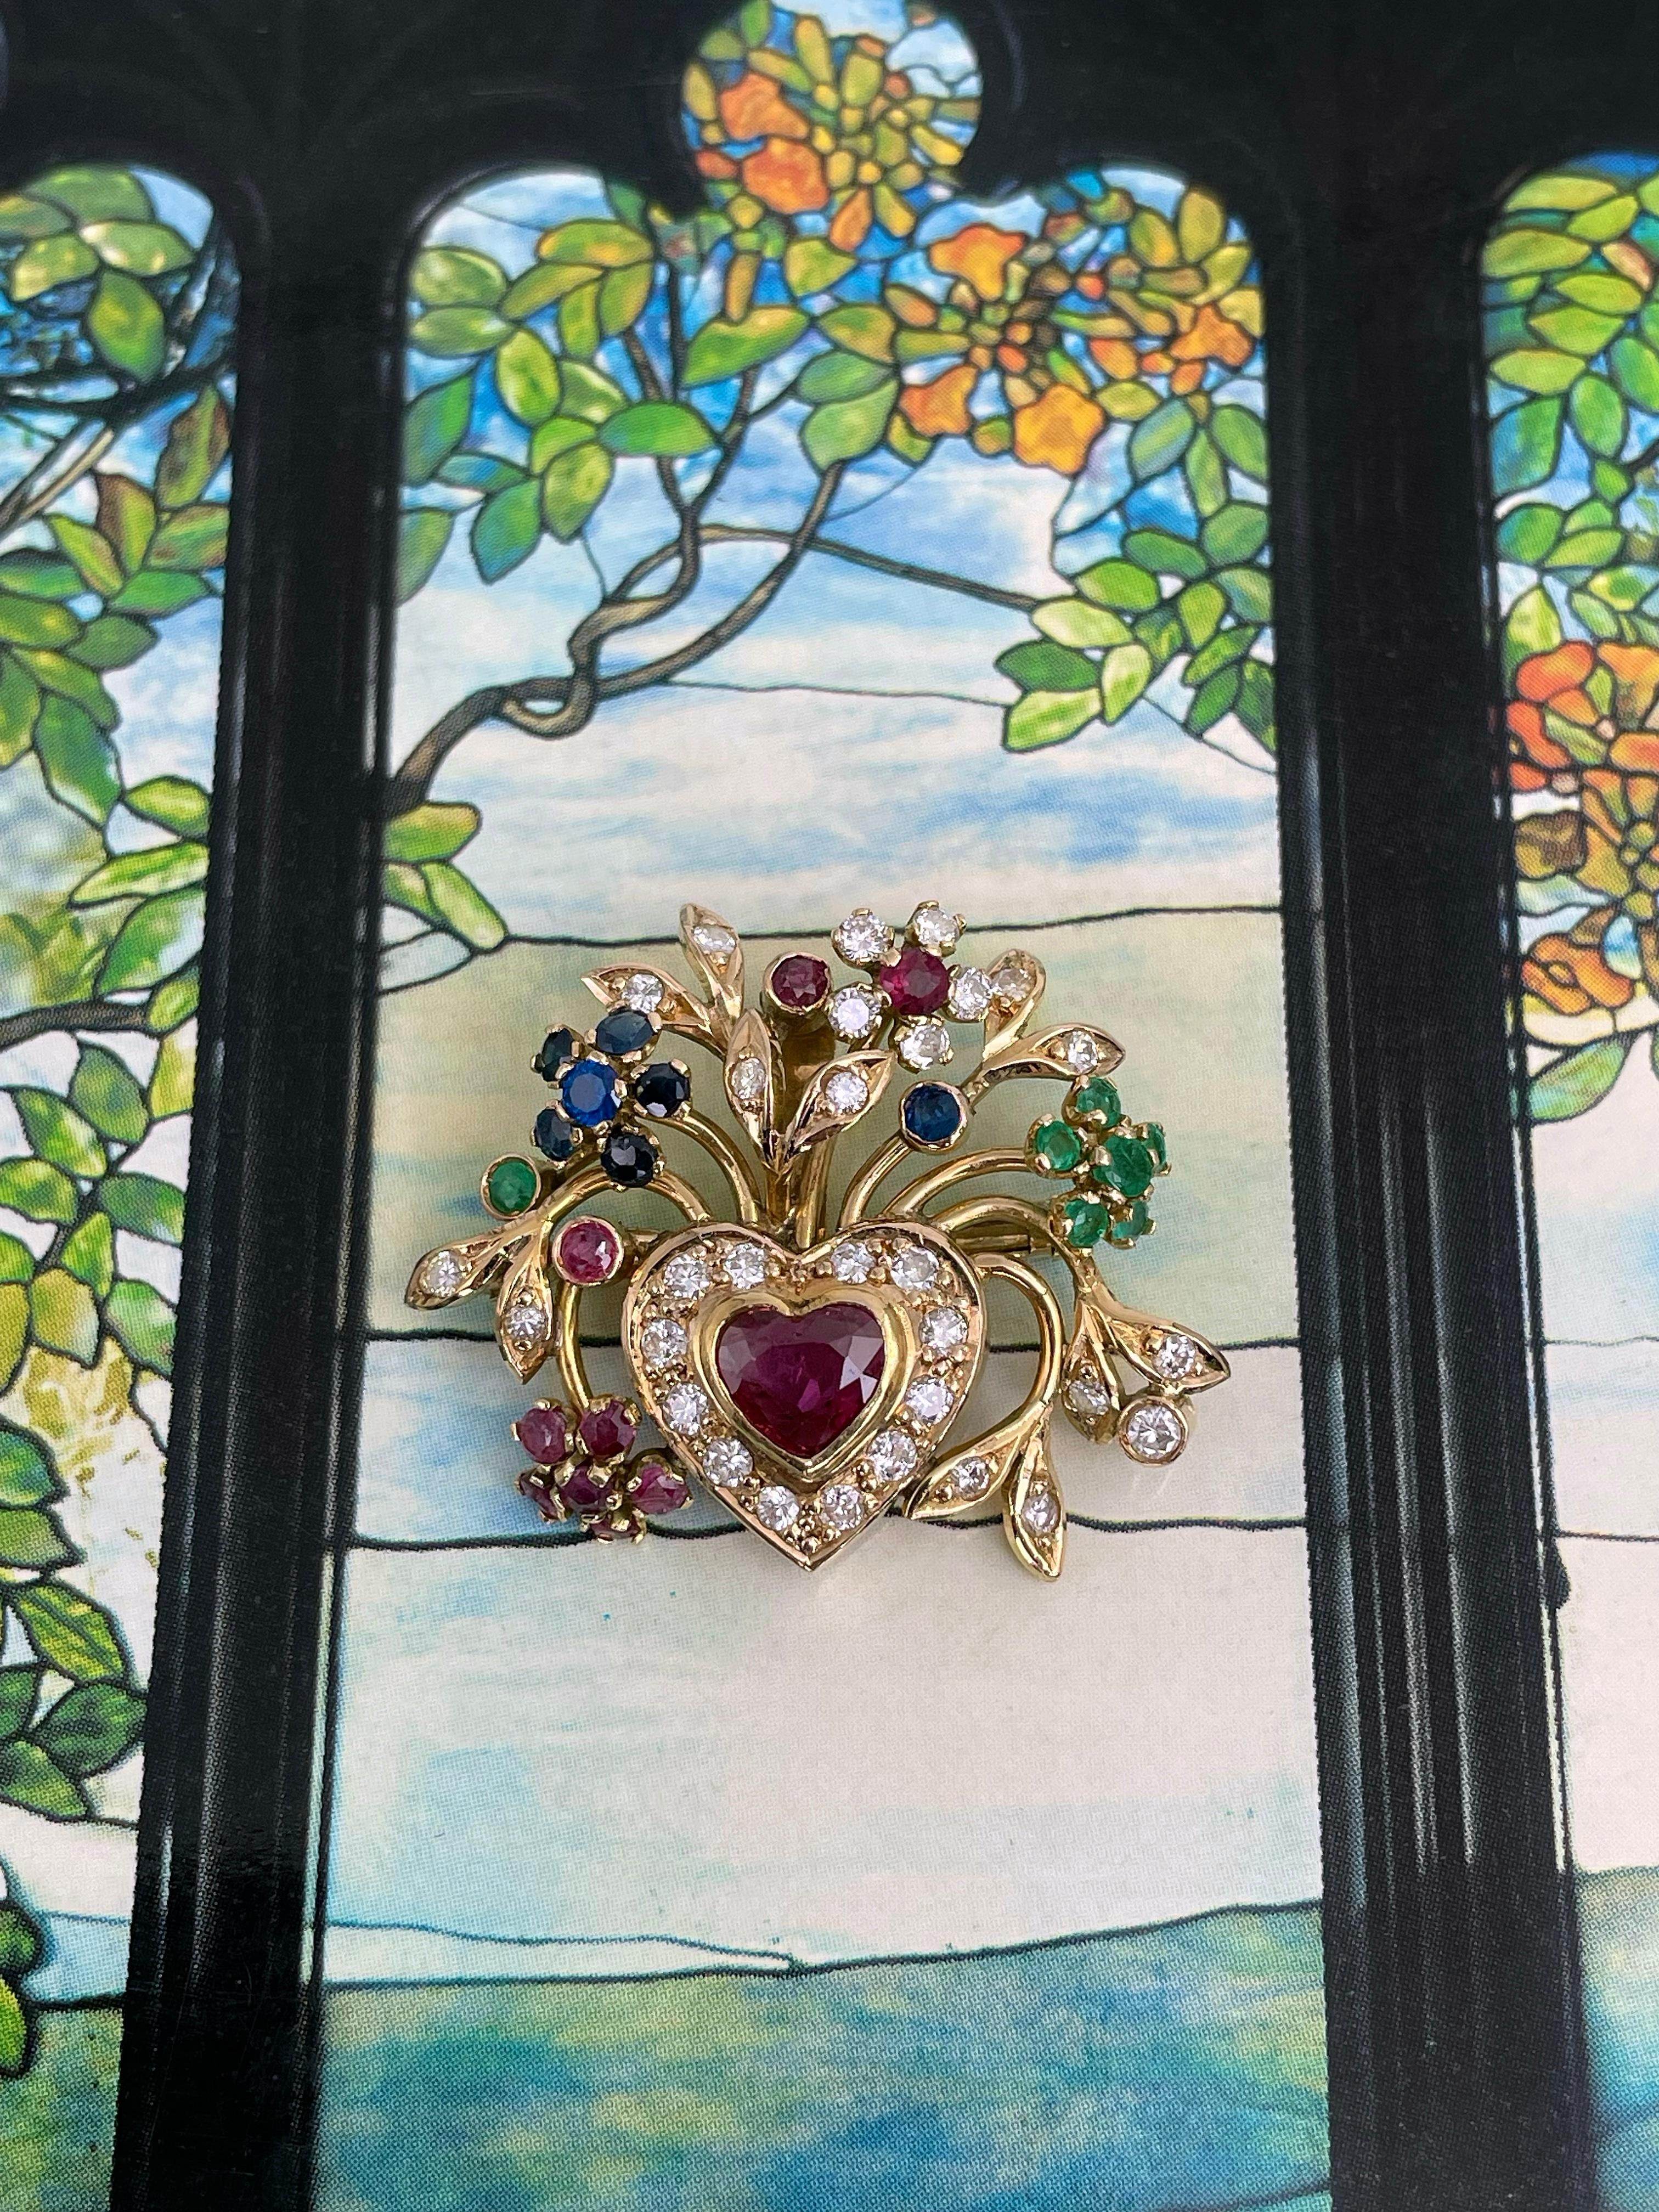 This is a lovely mid century floral design heart pendant brooch crafted in 18K yellow gold. Circa 1950. It features diamonds, rubies, emeralds, sapphires. 

Can be worn as a pendant or a brooch. Has a safe trombone clasp. 

Size: 3x2.5cm
Weight: